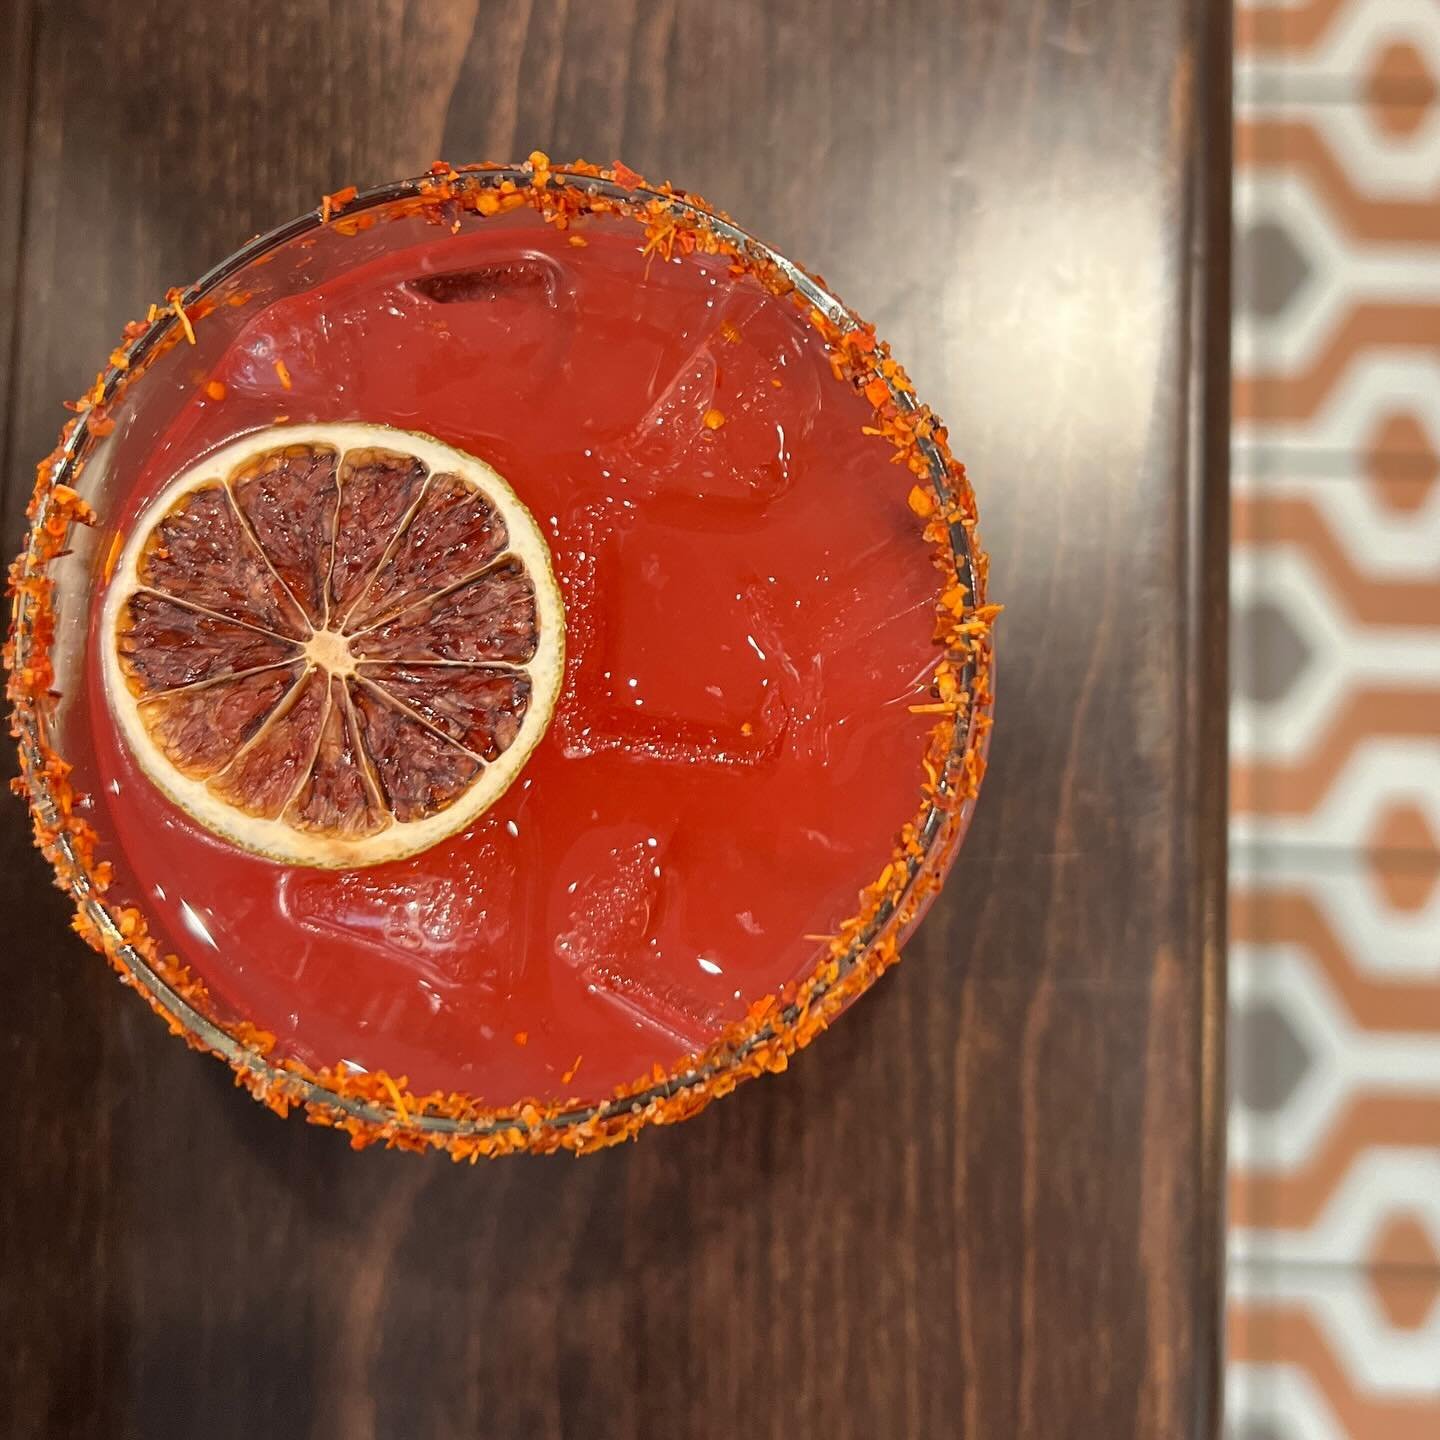 Starting out the week with some new cocktails on the list! This is our Blood Orange Margarita made with @loshermanostequila, @chacho_usa for some kick, fresh blood oranges, lime, simple and a Tajin rim. All three of our new cocktails are half off Tue